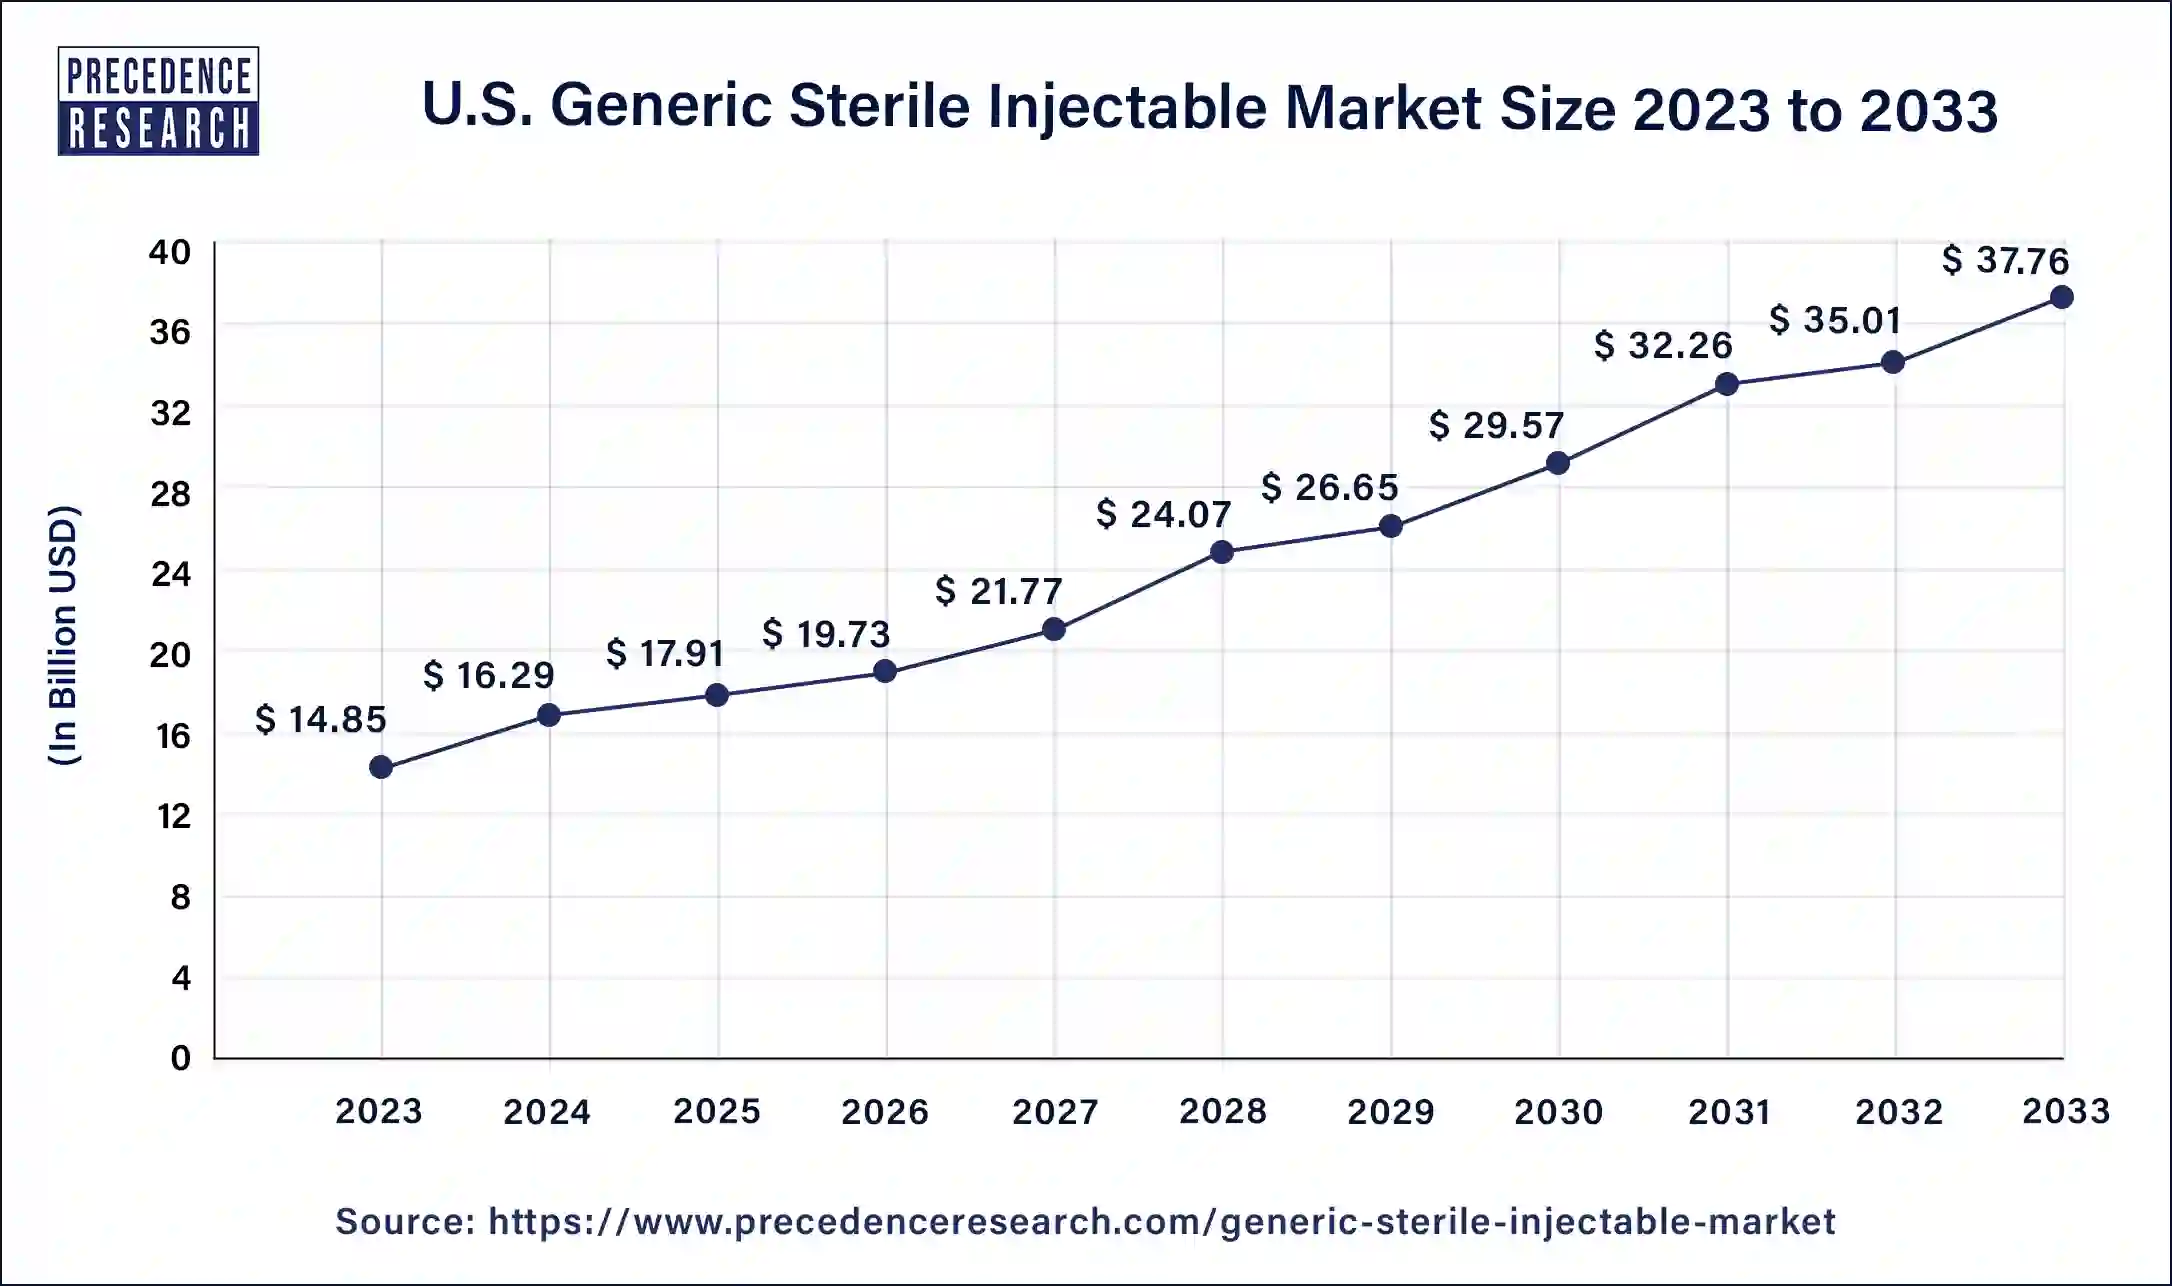 U.S. Generic Sterile Injectables Market Size 2024 to 2033